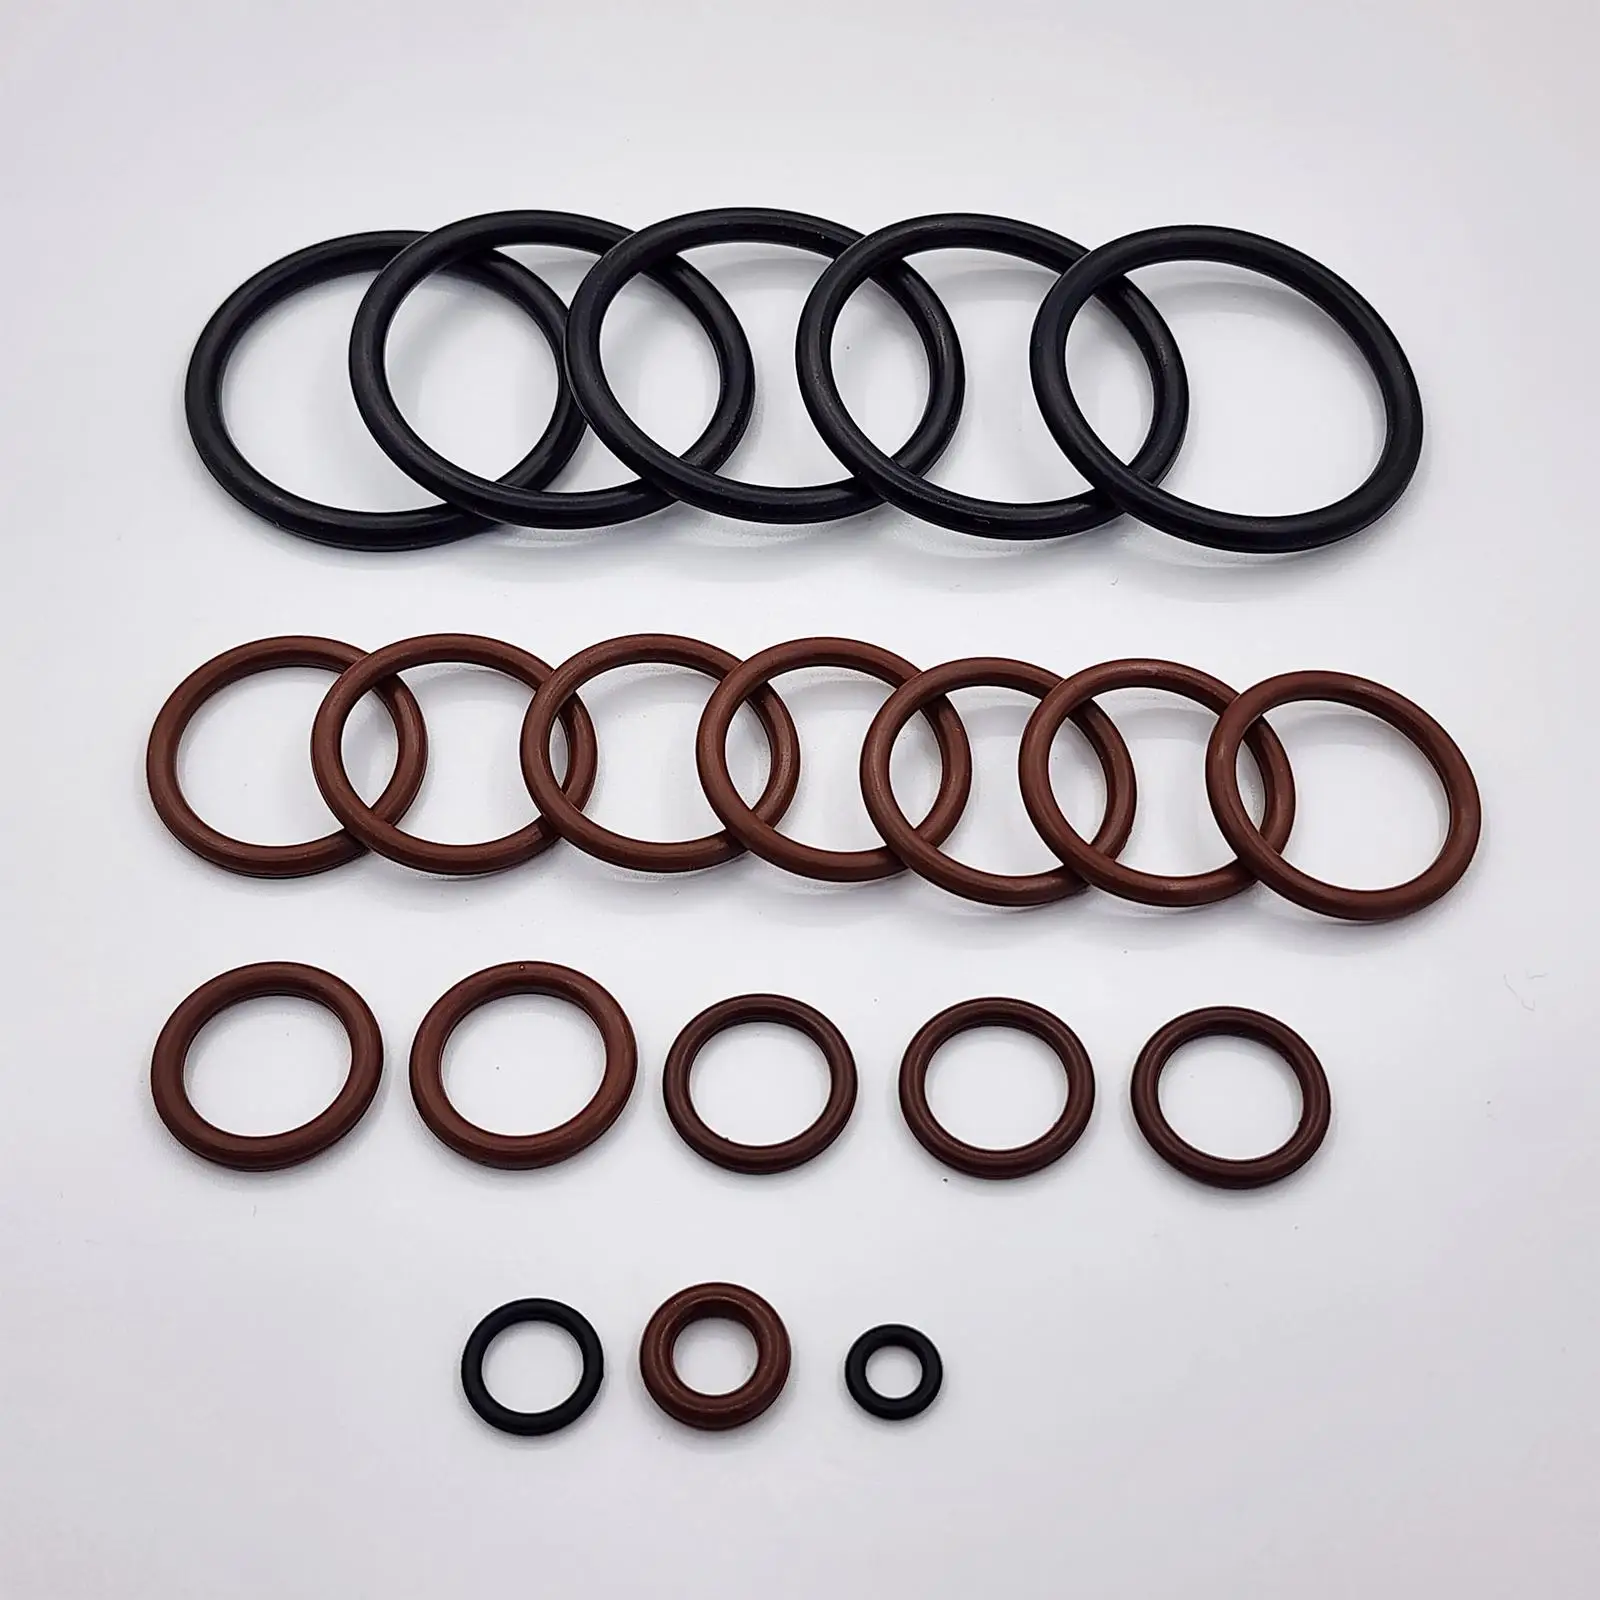 Cooling System O- Kit Air or Gas Sealing Connections O   Accessories Replaces for  E46 M52 